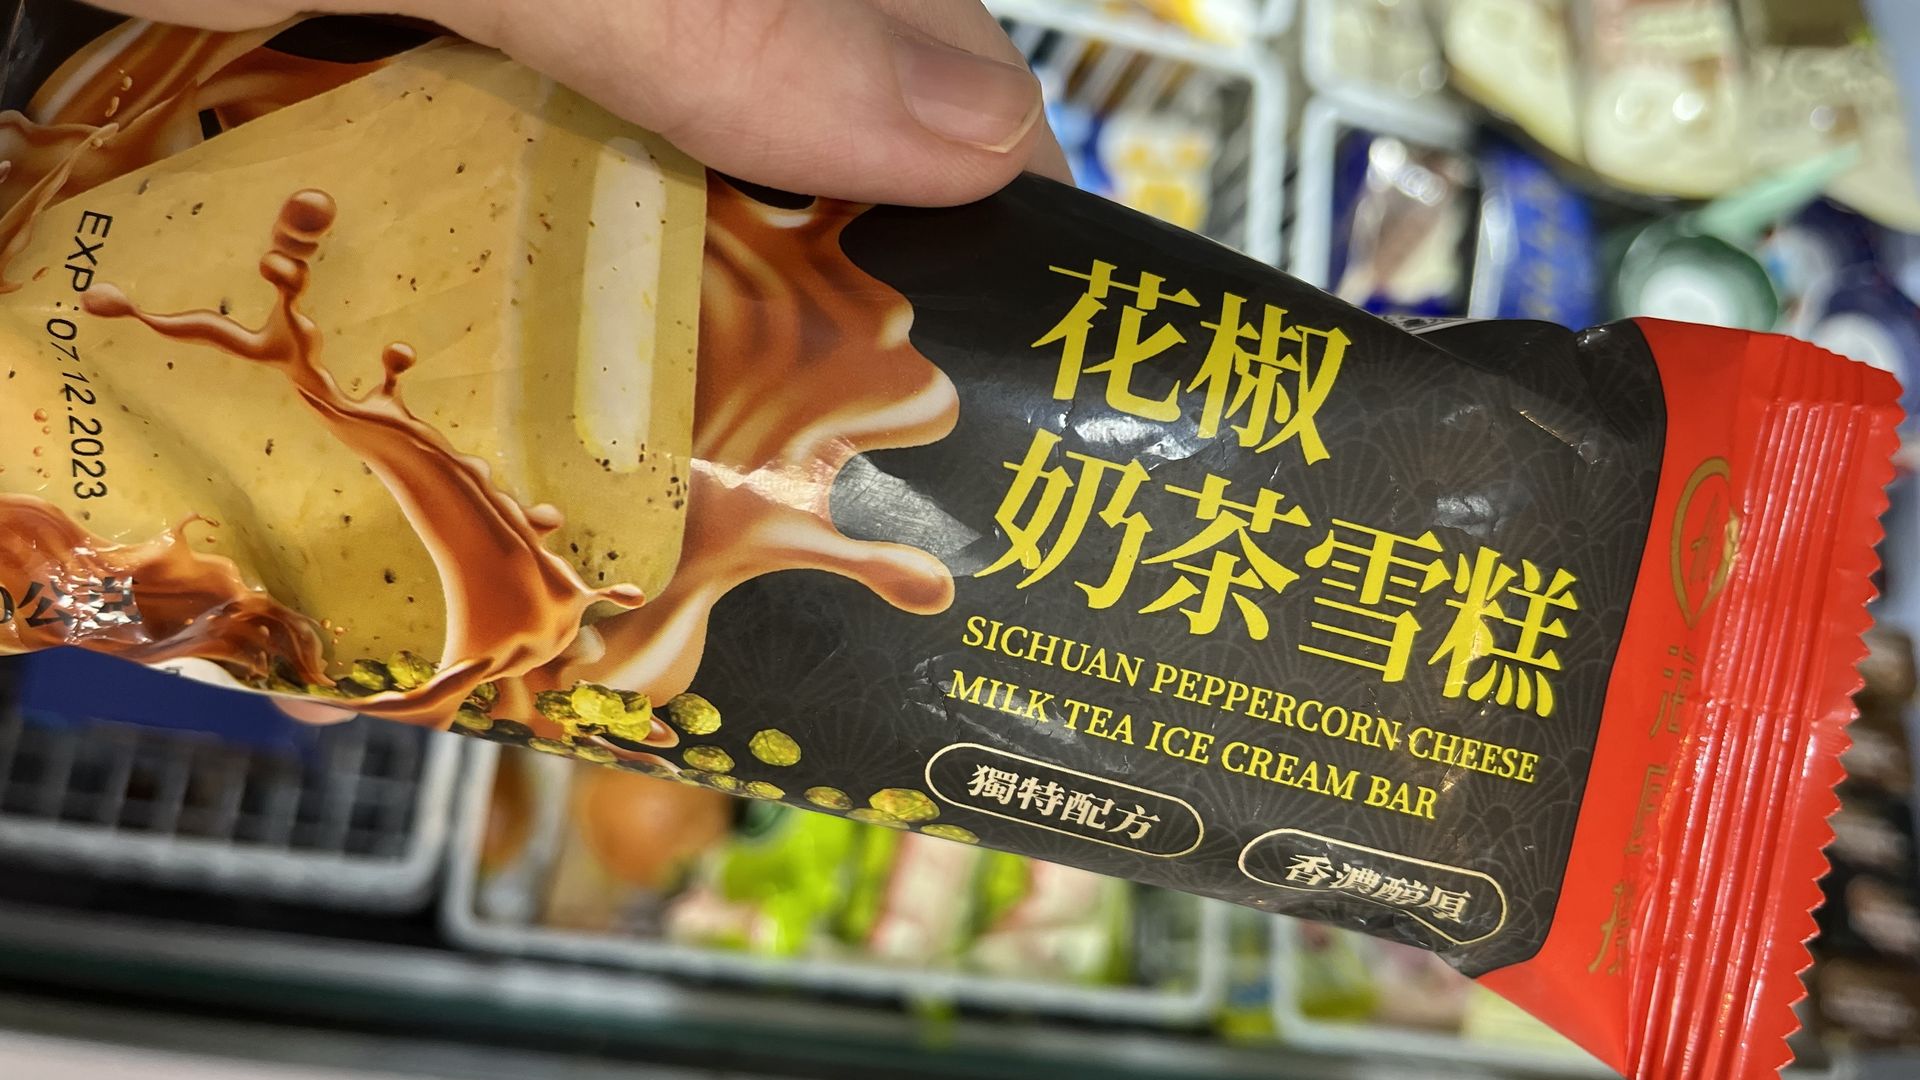 An ice cream bar in Taiwan flavored with Sichuan peppercorn, cheese, and milk tea